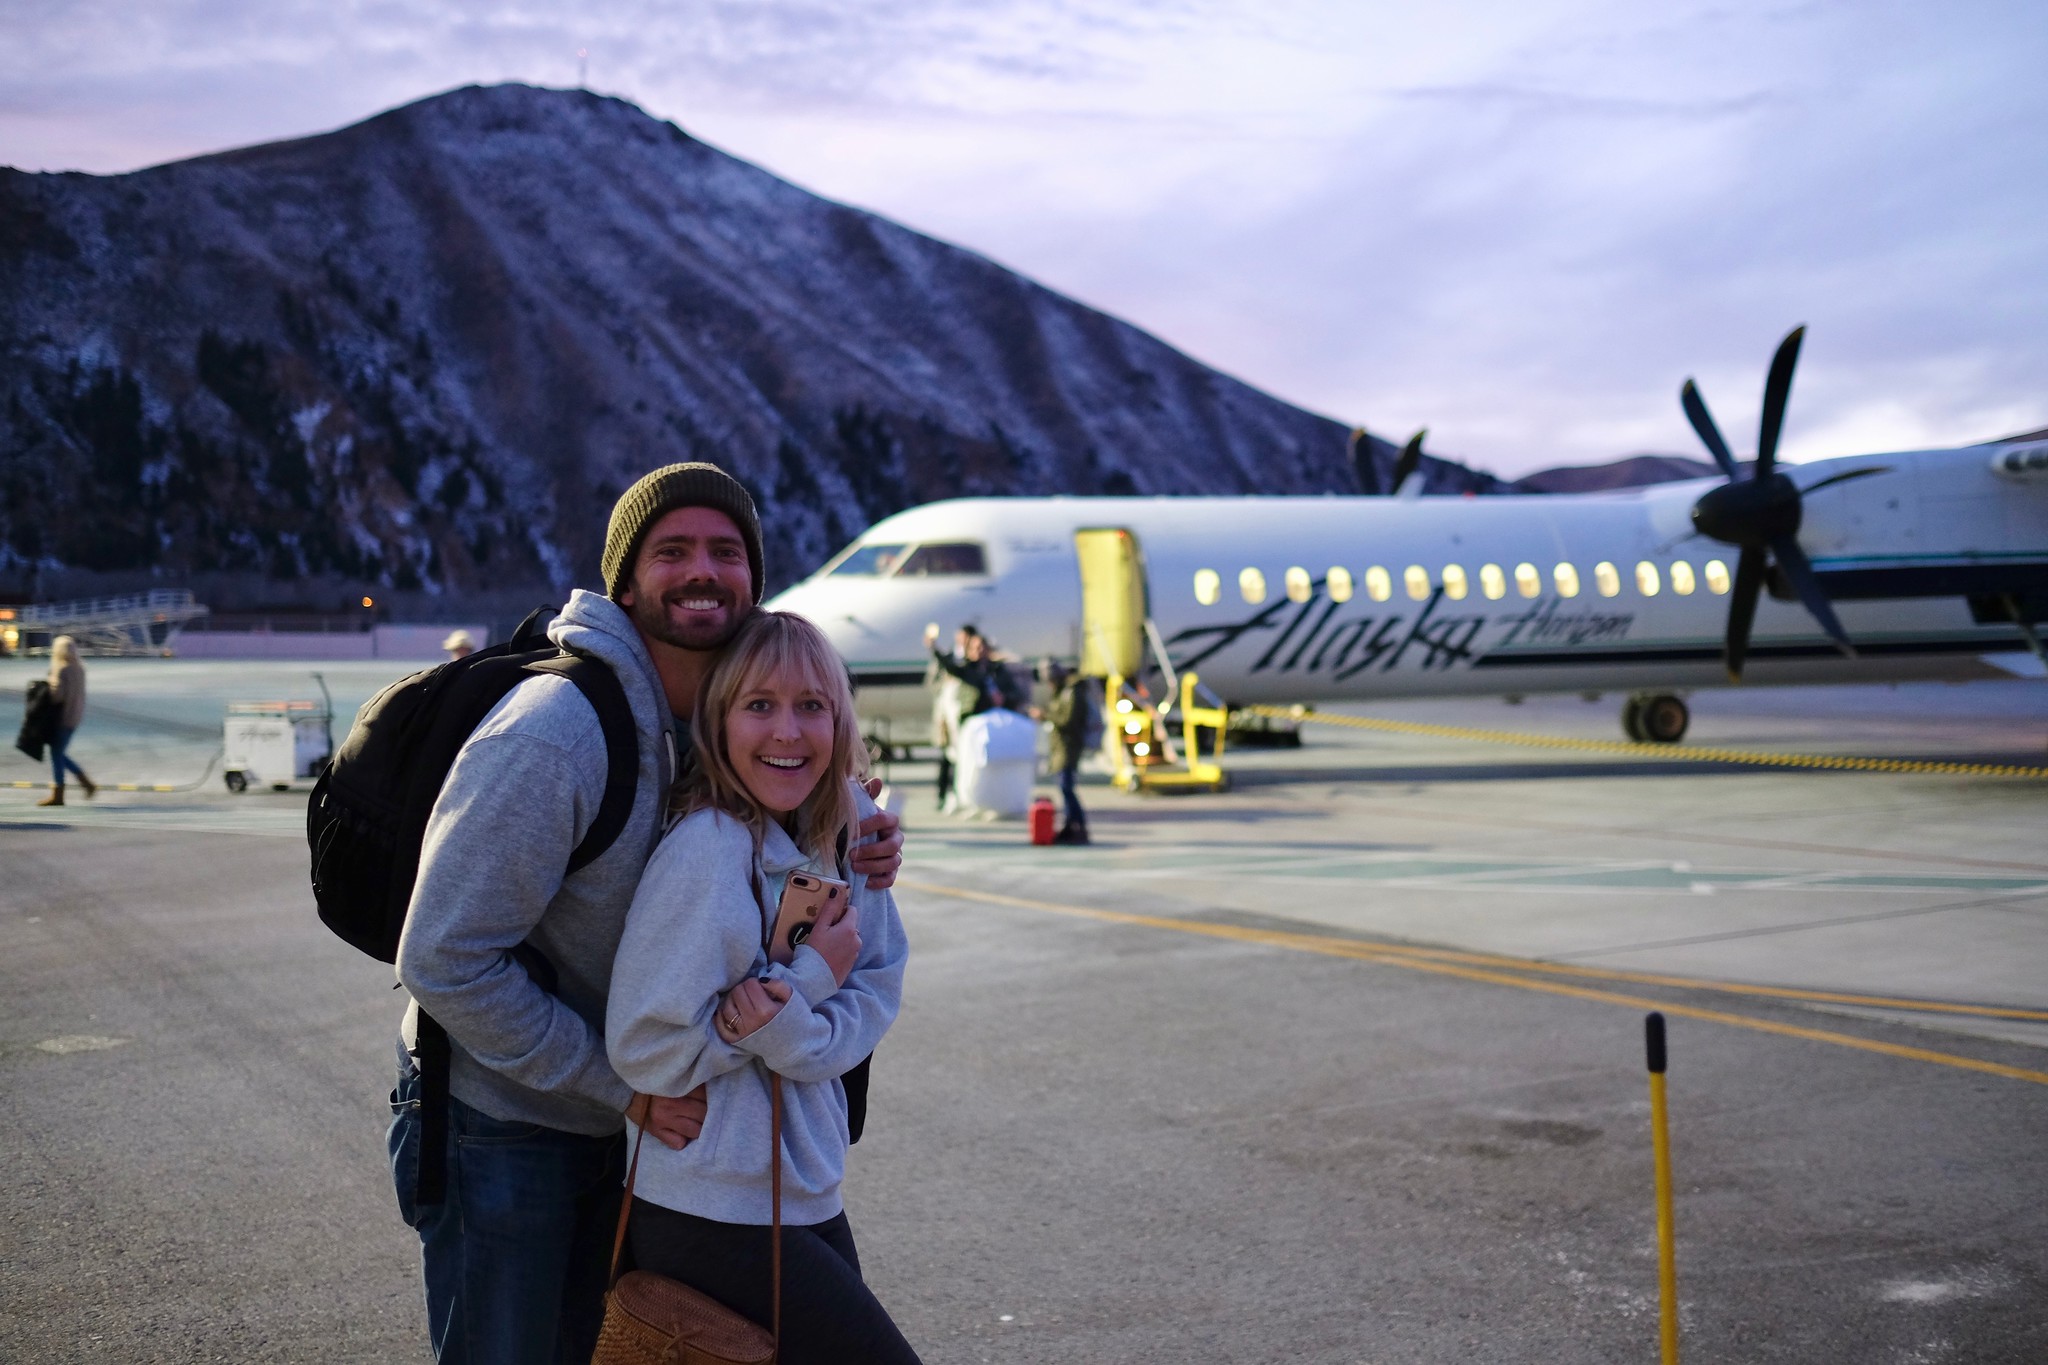 Traveling Newlyweds Fly to Sun Valley, Idaho on Alaska Airlines for a Couples Weekend